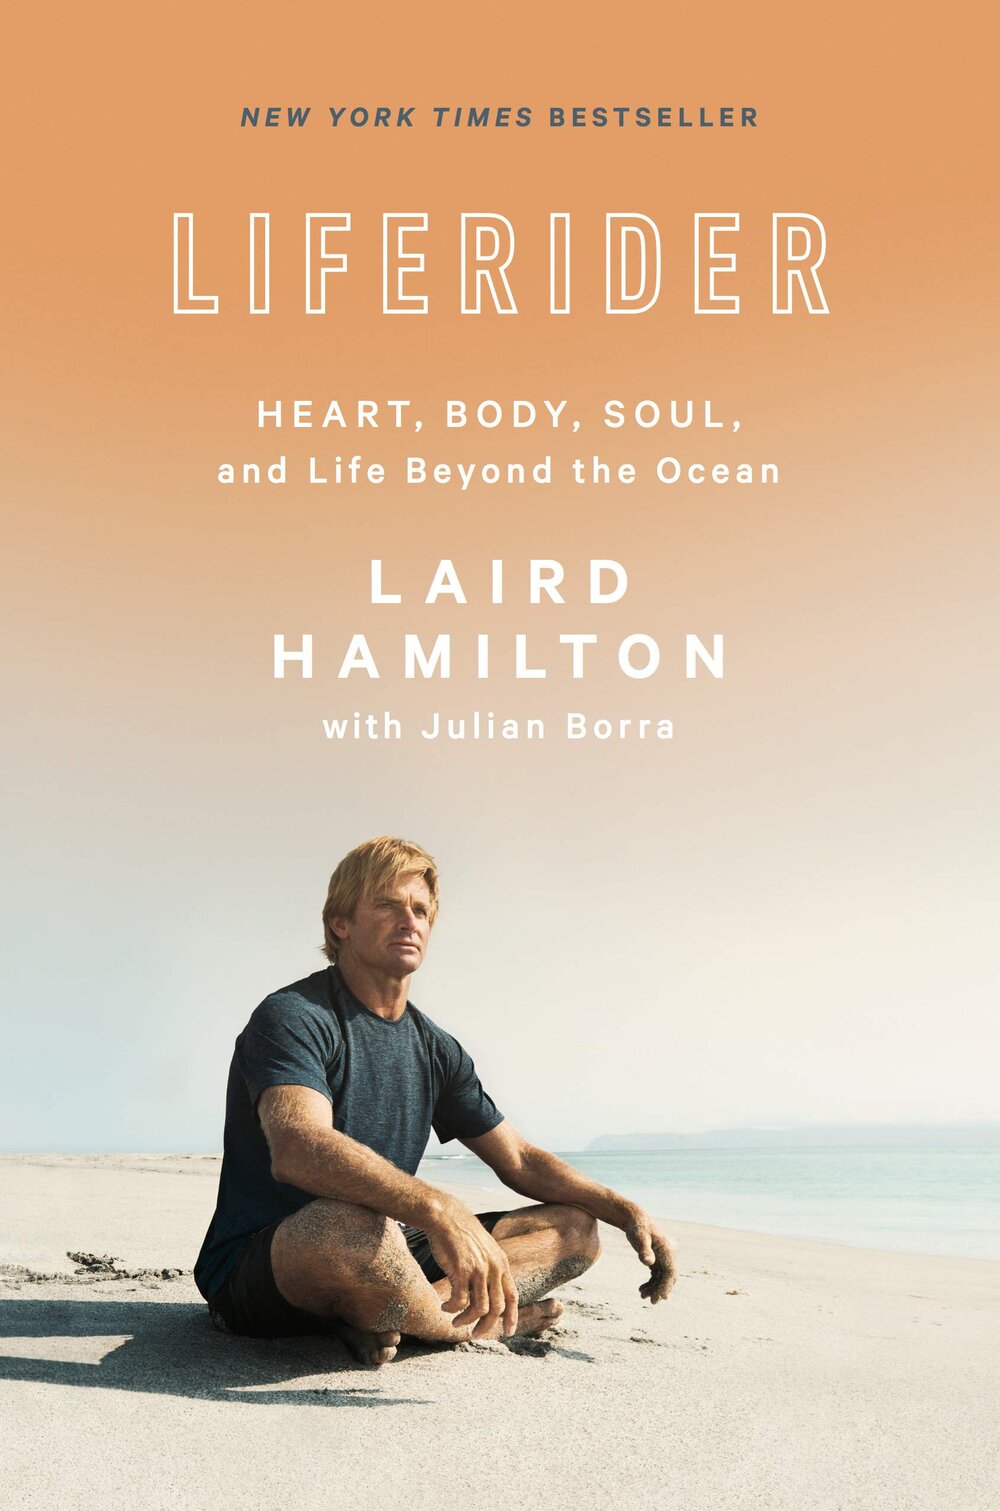 Liferider: Heart, Body, Soul, and Life Beyond the Ocean by Laird Hamilton